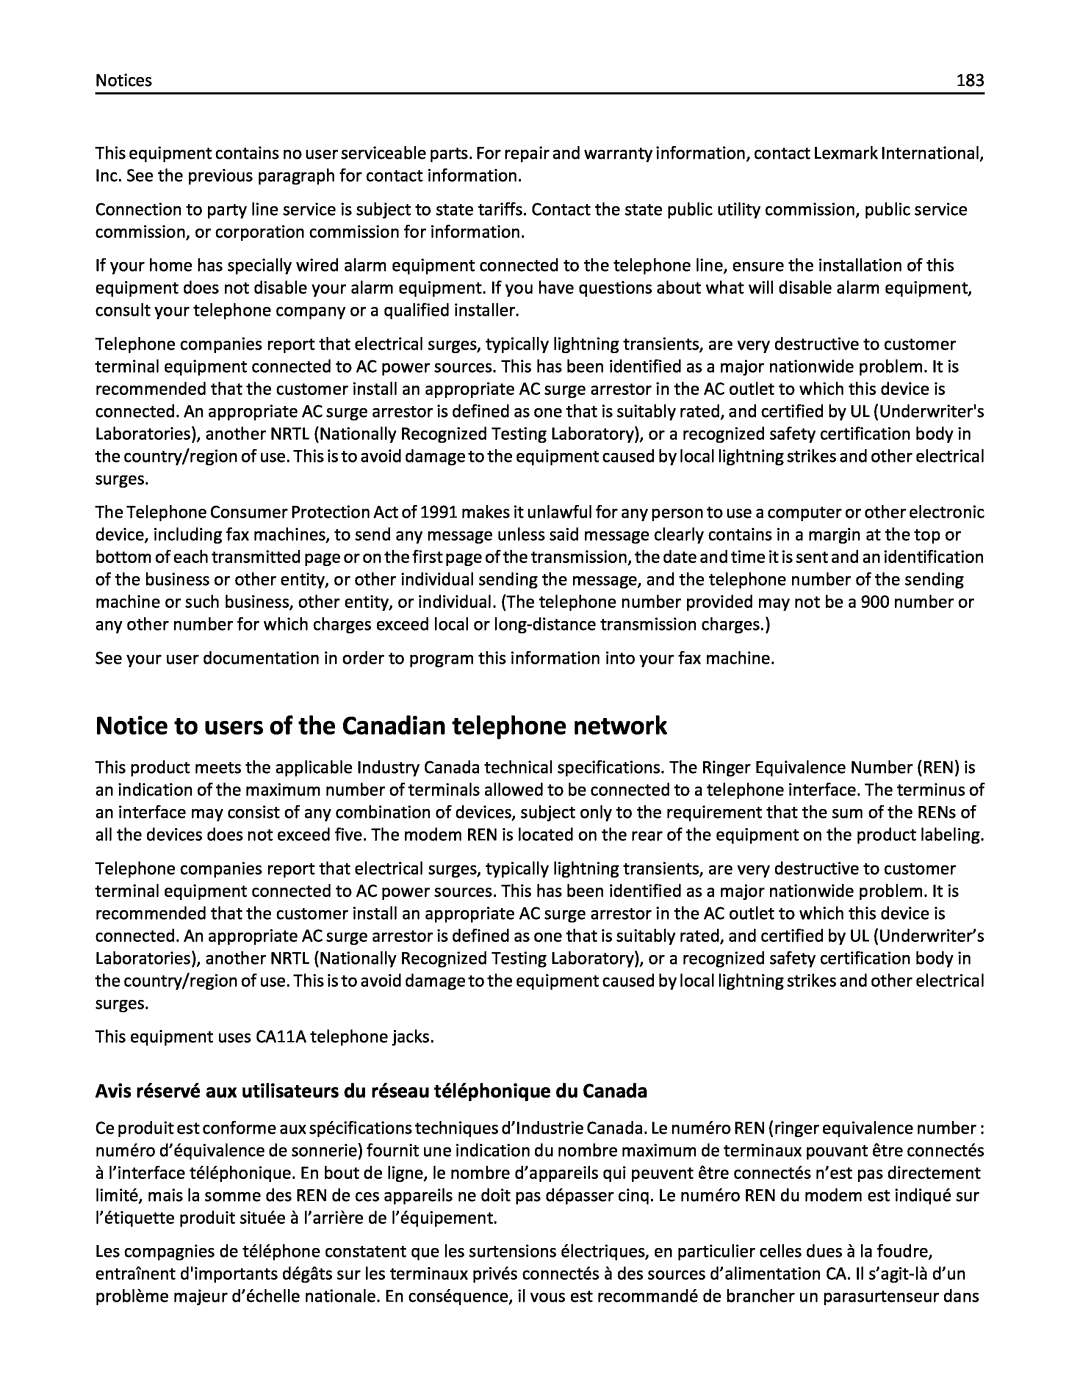 Lexmark 200, 20E manual Notice to users of the Canadian telephone network 